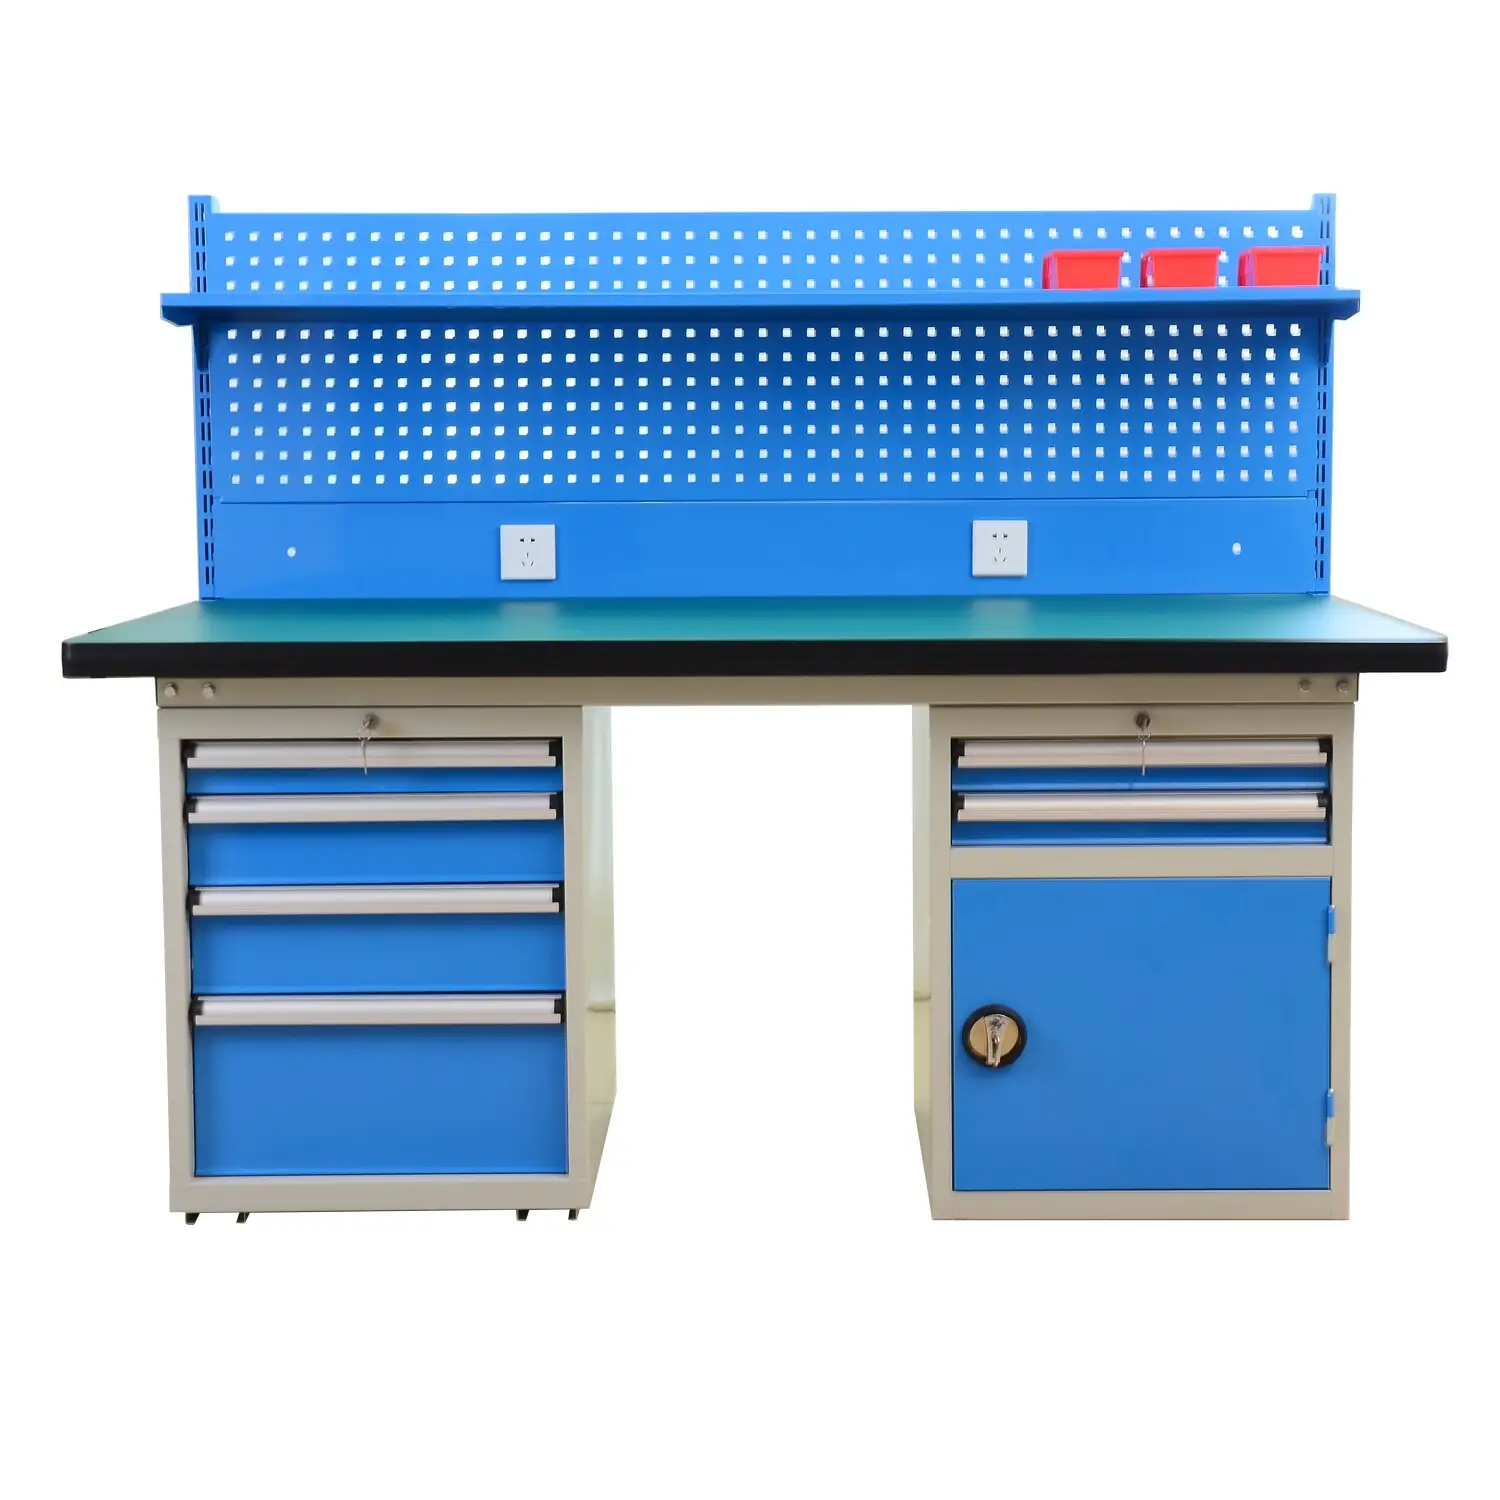 Light portable worktable cabinet stainless steel table packing station workbench